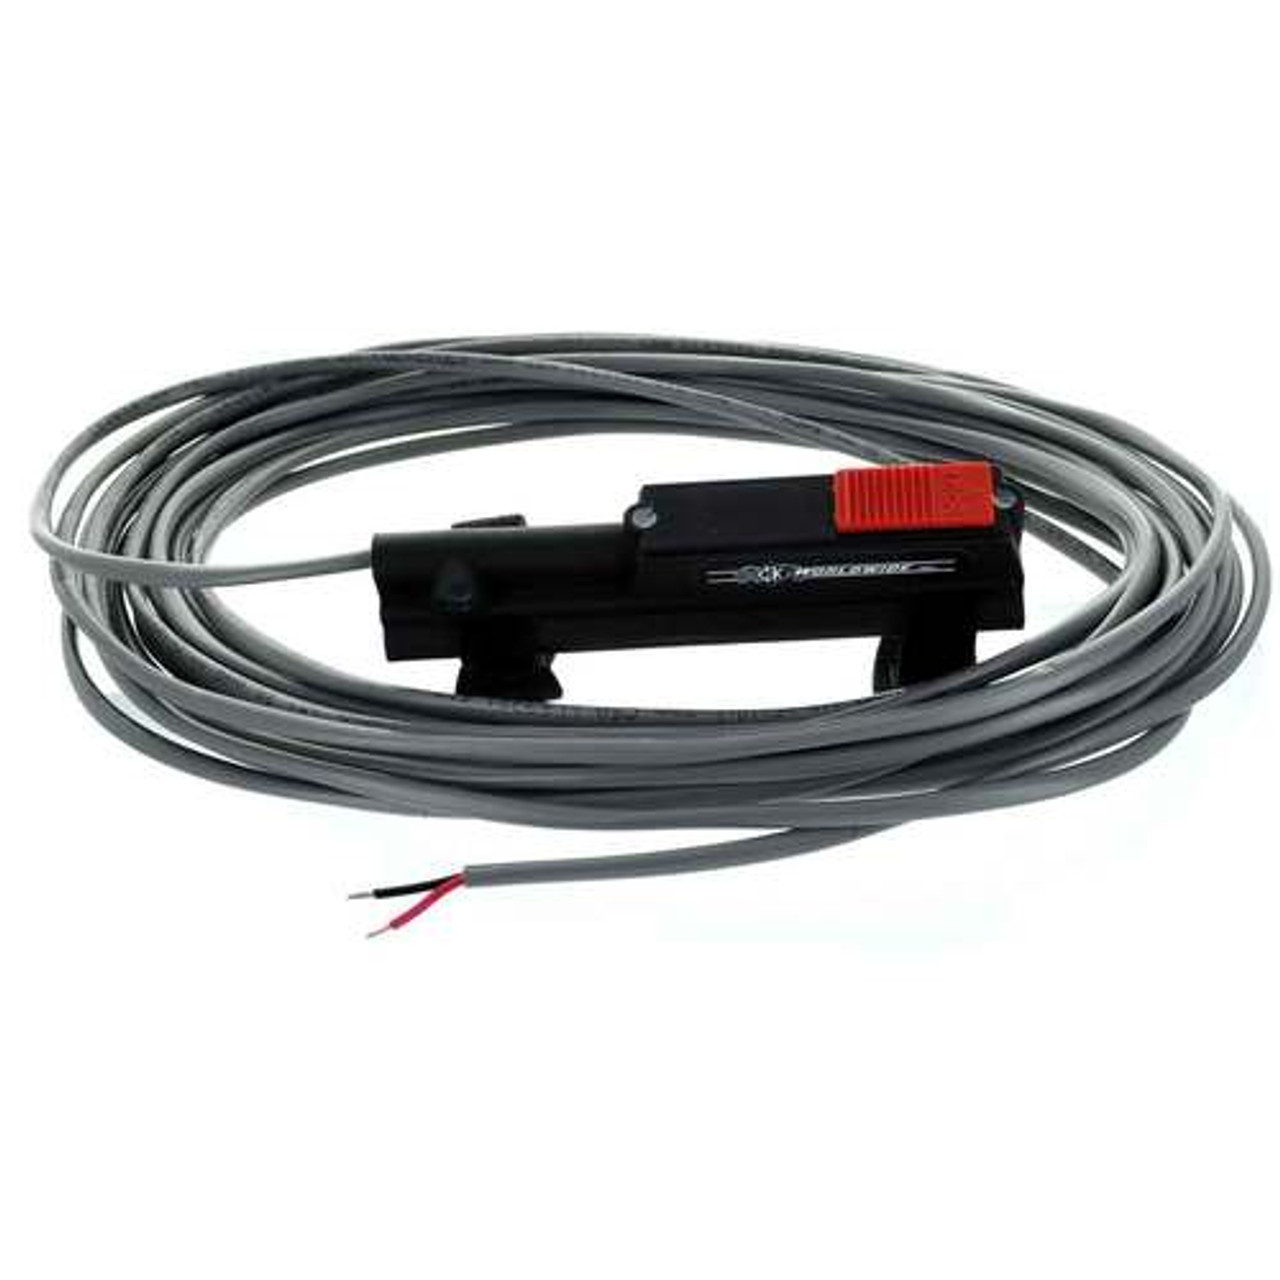 CK ESLCV25 Locking Switch with Velcro 26.5' Cable No Plug